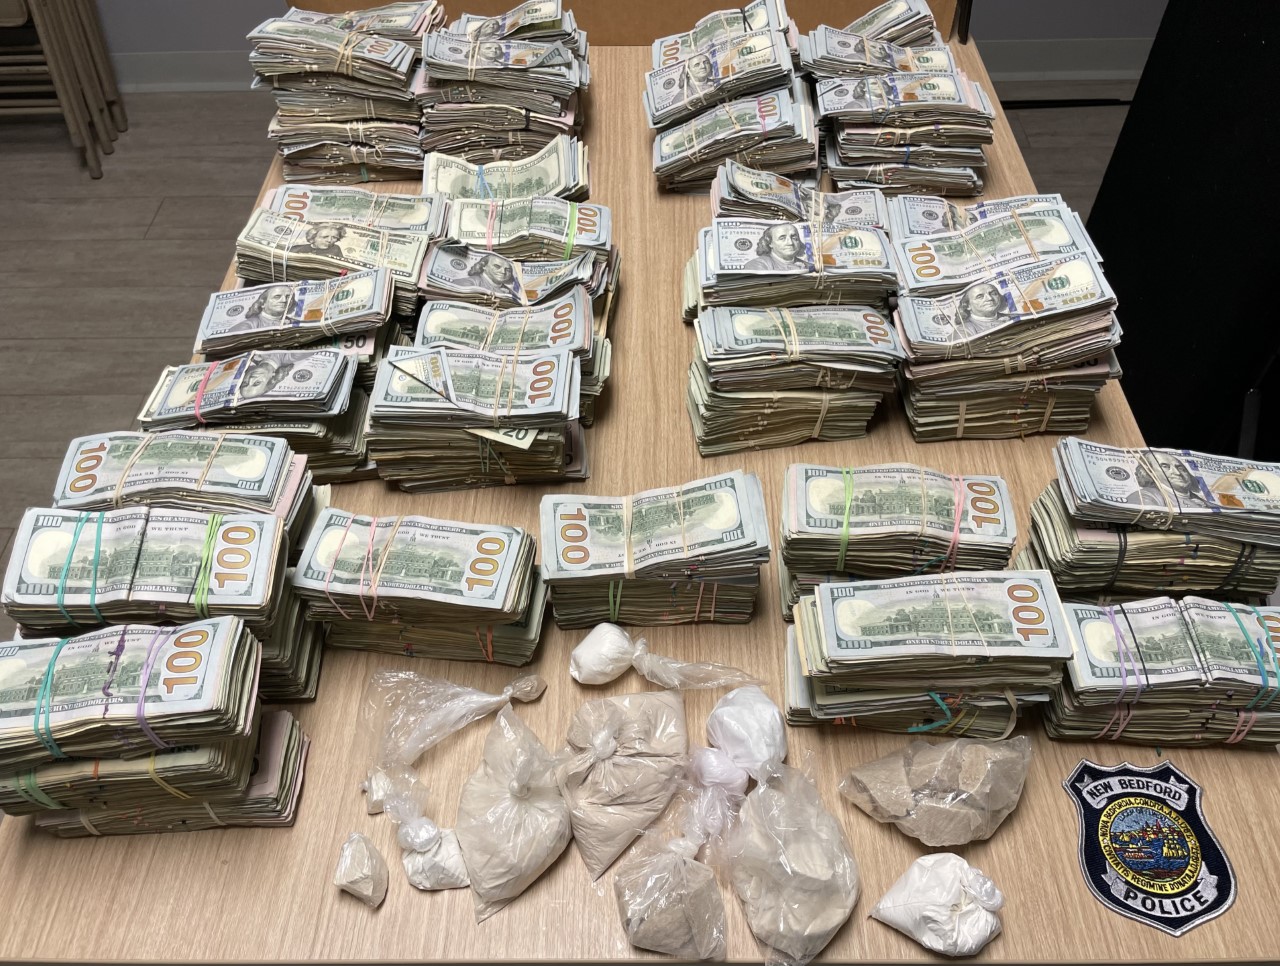 New Bedford police recover nearly .3M in cash, largest seizure in department history